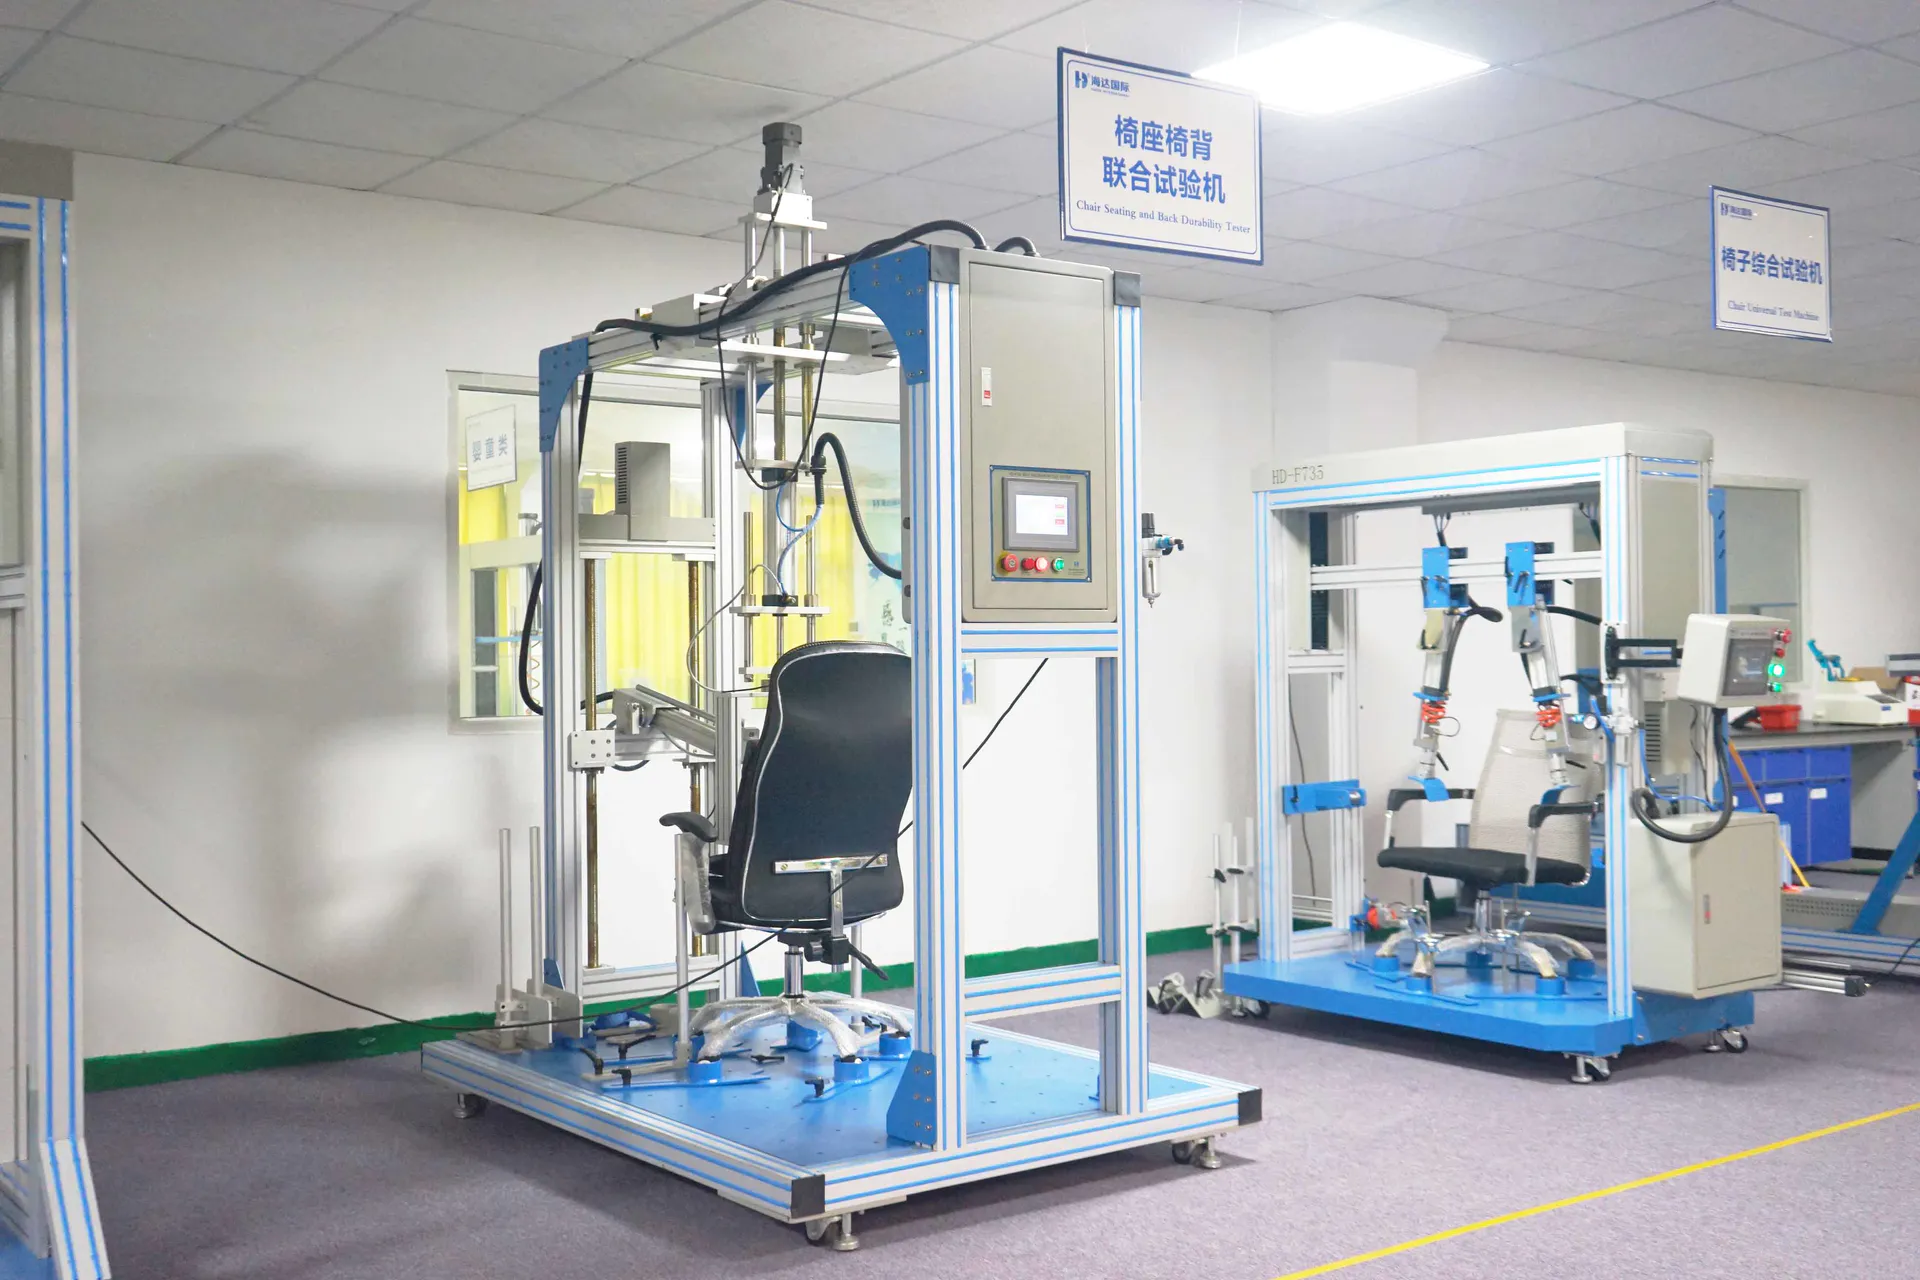 Chair seat back joint testing machine